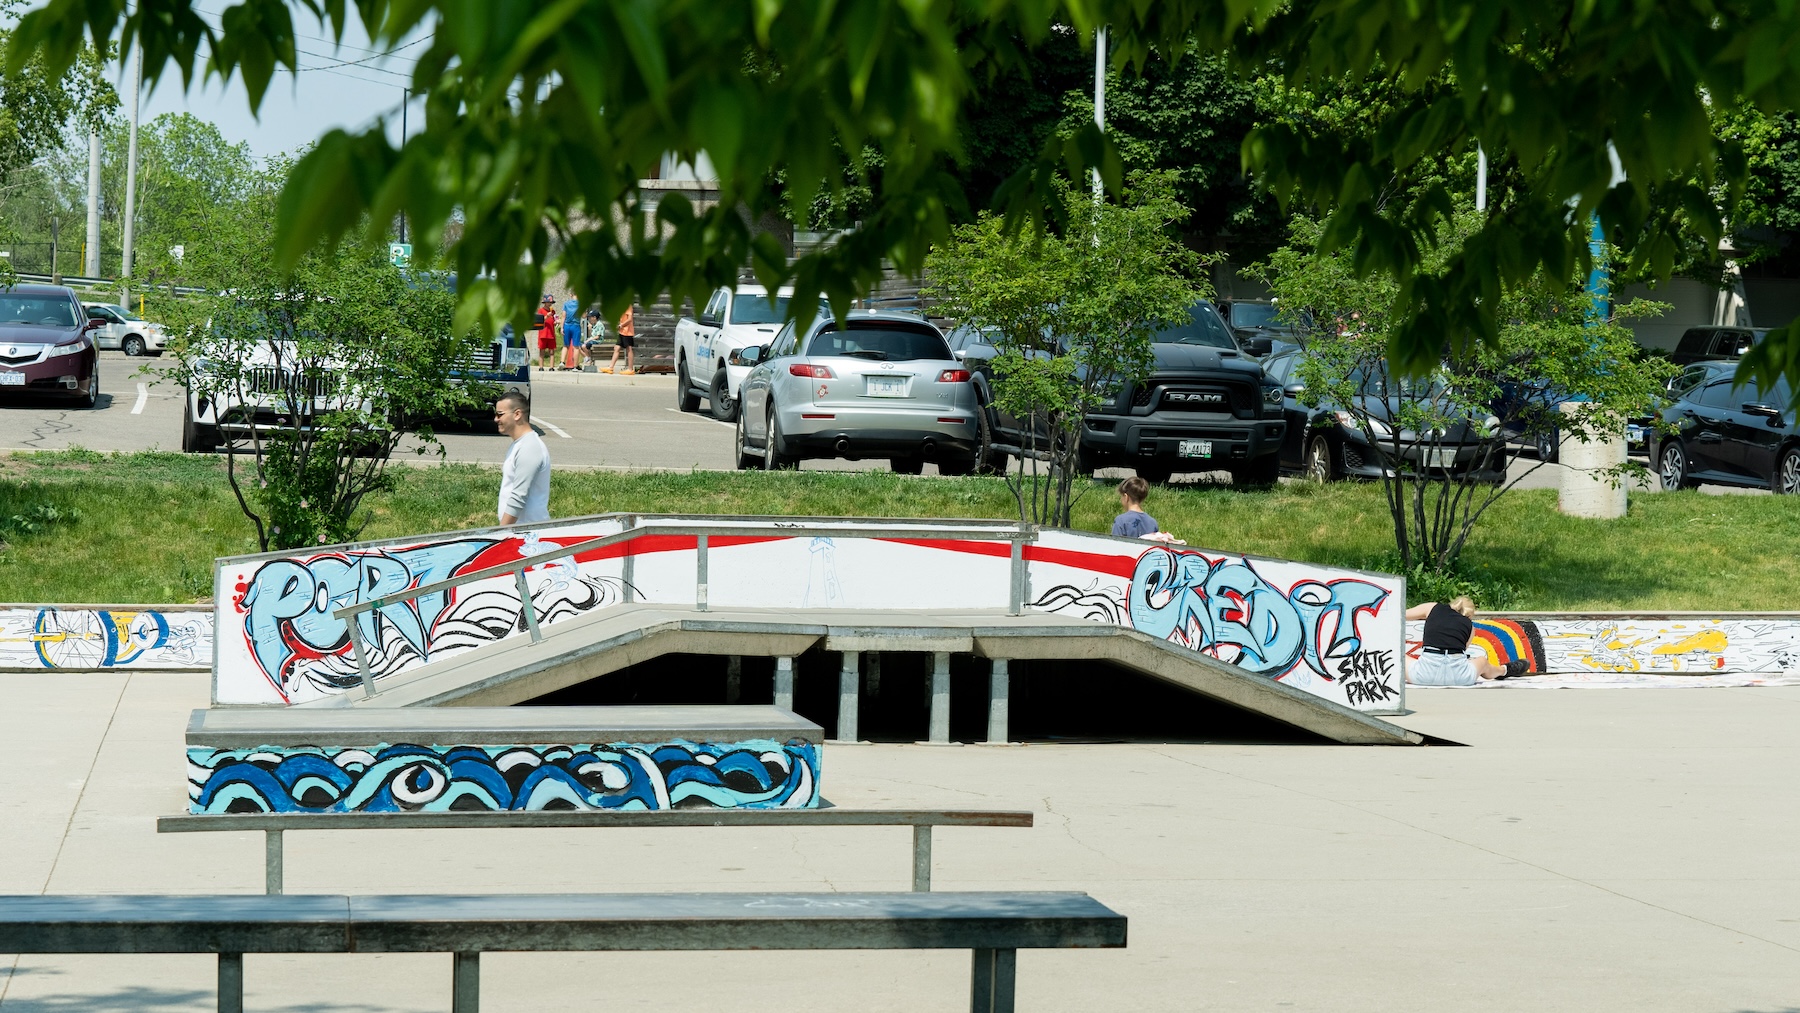 A paint jam at a skate park in Port Credit led by Ray Vidal as part of Mississauga Movement by STEPS Public Art and the City of Mississauga